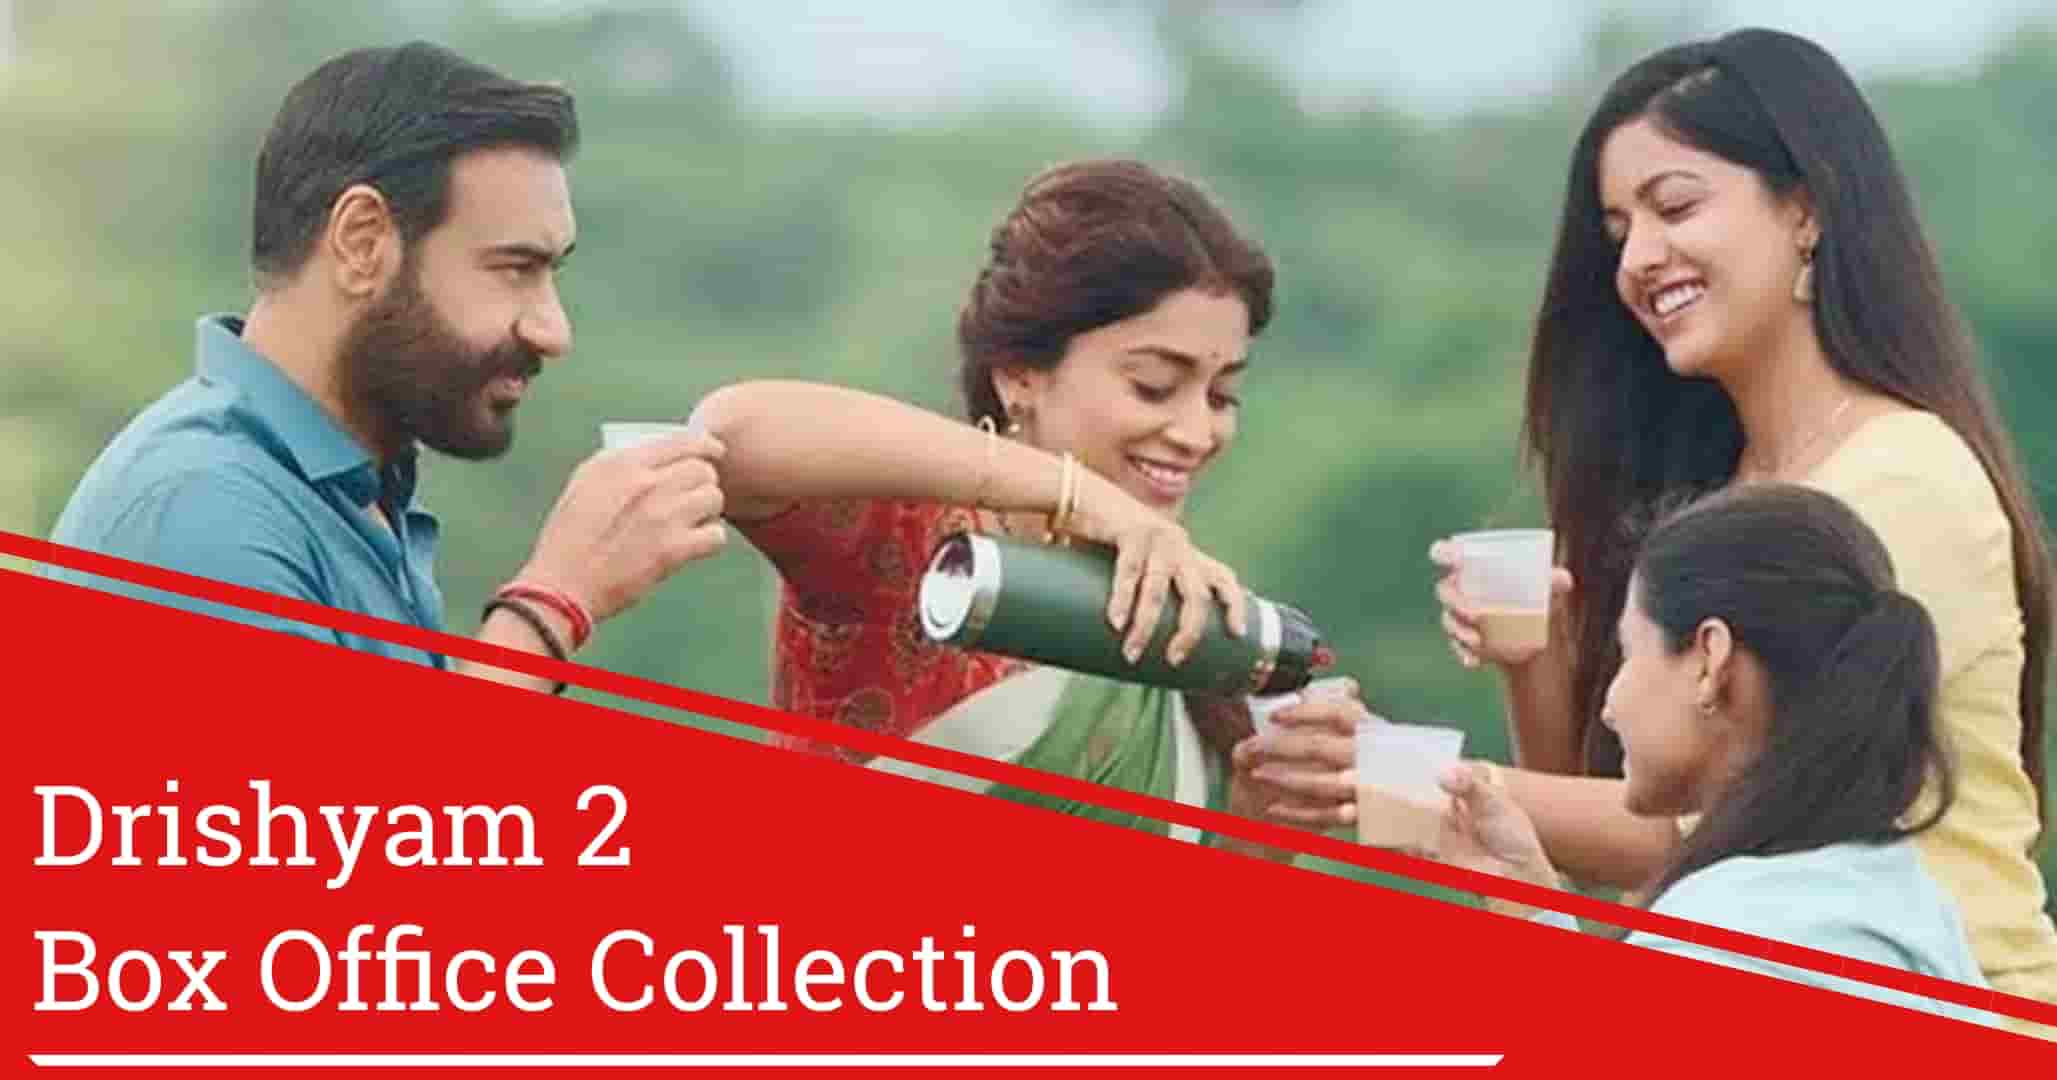 Drishyam 2 Box Office Collection, Story, Review